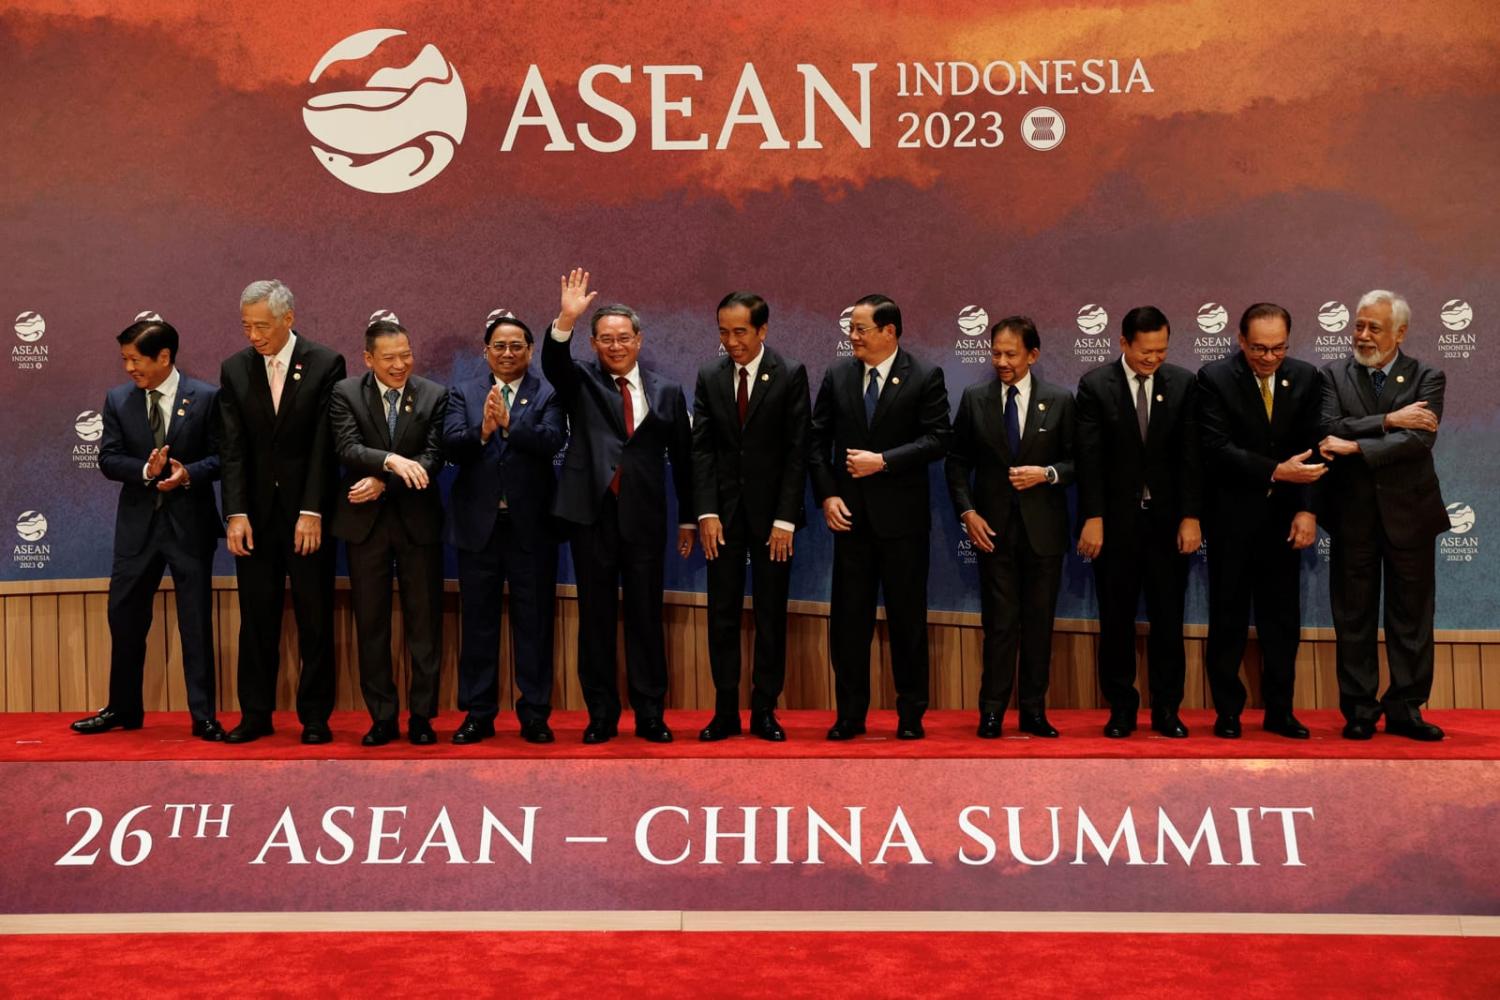 China's Premier Li Qiang waves amid the assembled ASEAN leaders following the ASEAN-China Summit, 6 September 2023 (Willy Kurniawan, Mast Irham via AFP/Getty Images)